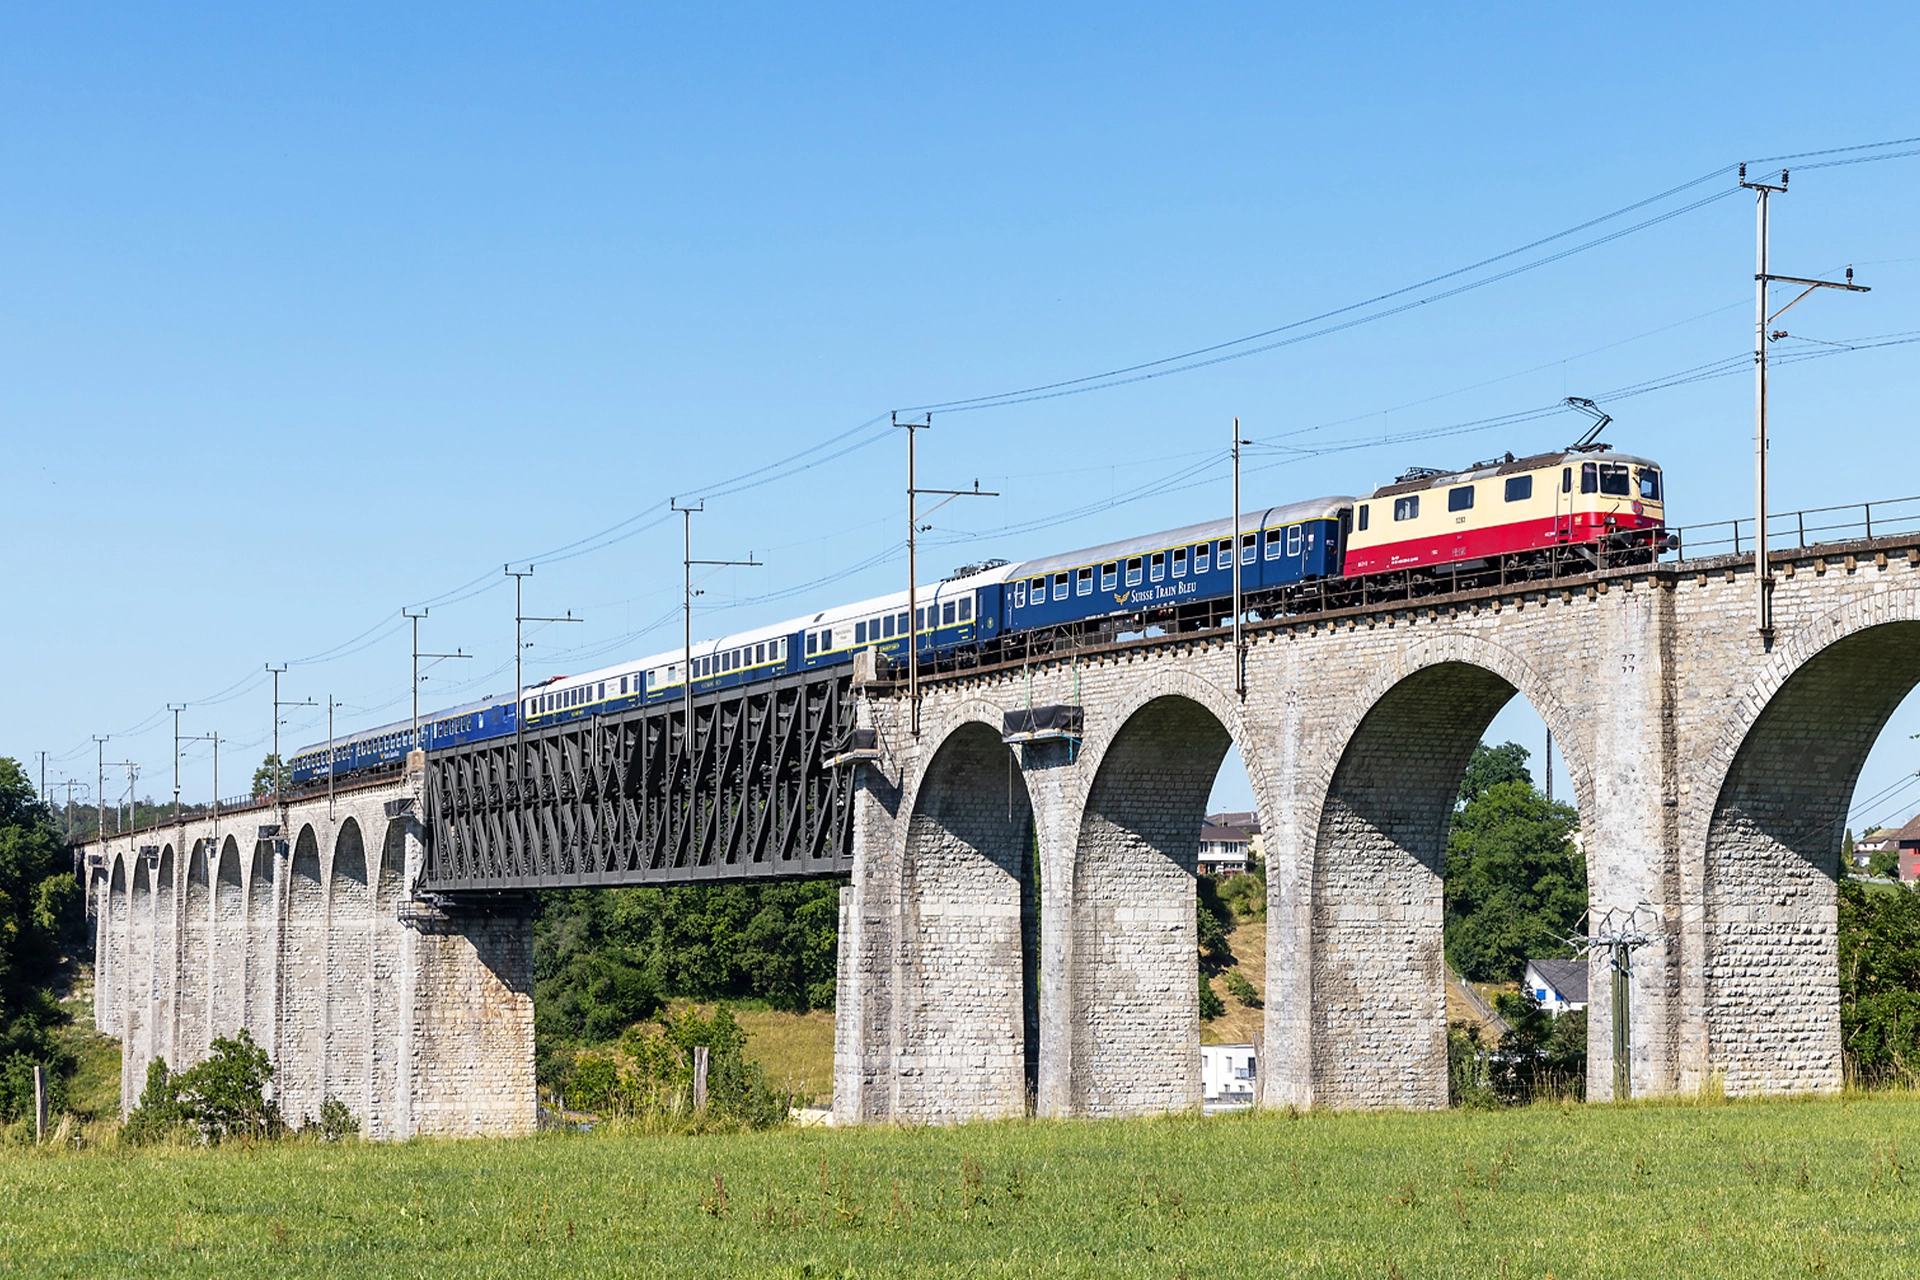 Journey of discovery with the "Suisse Train Bleu" through Austria